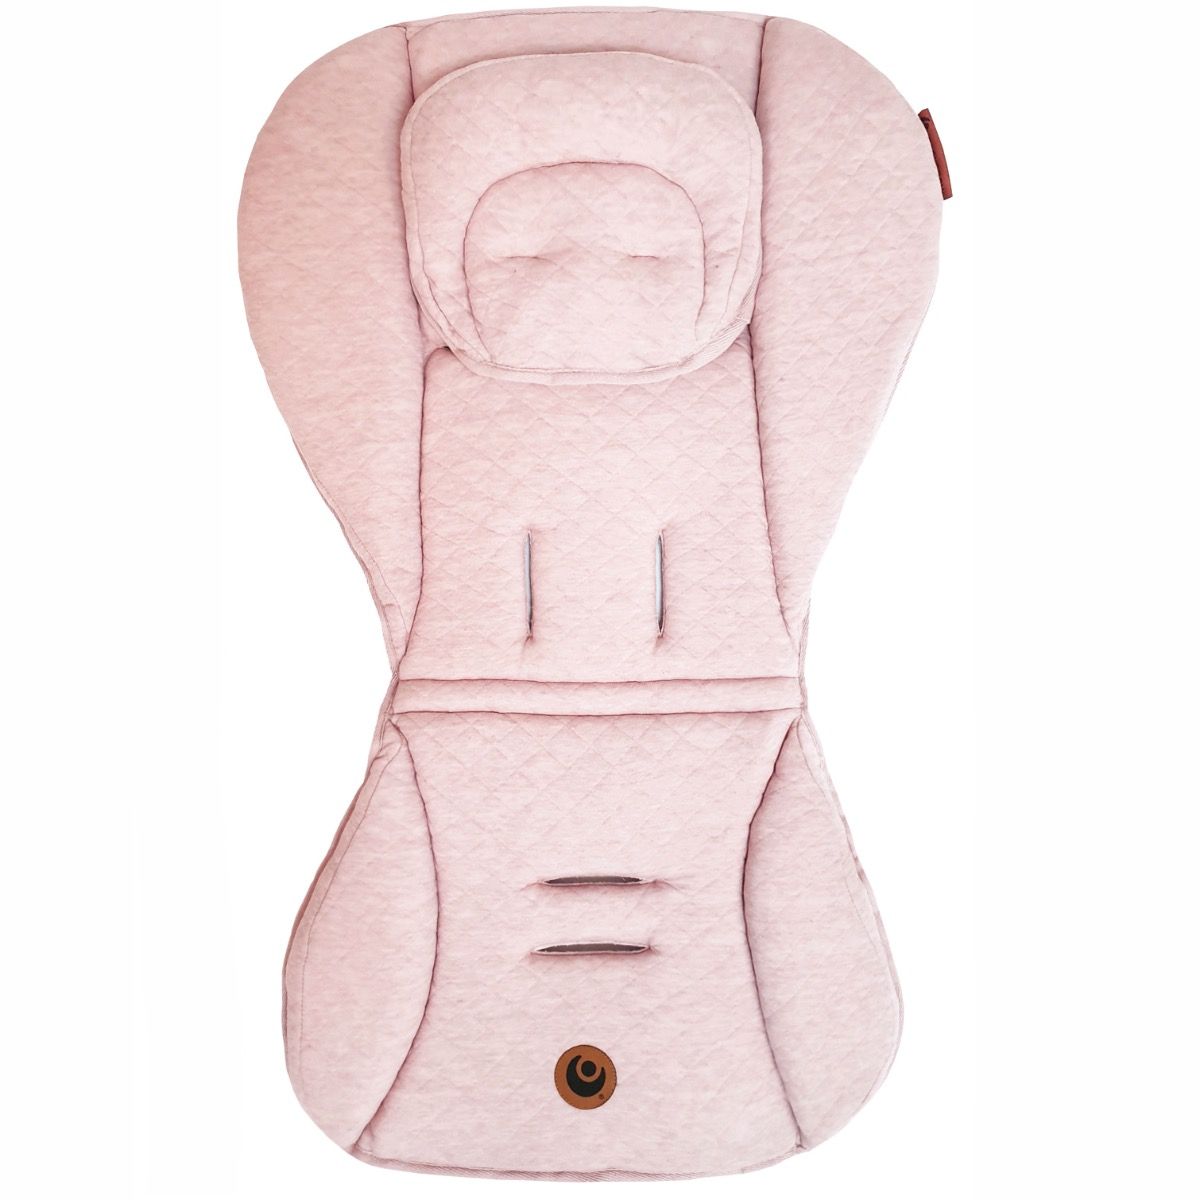 Easygrow Minimizer Support, Dusty Pink